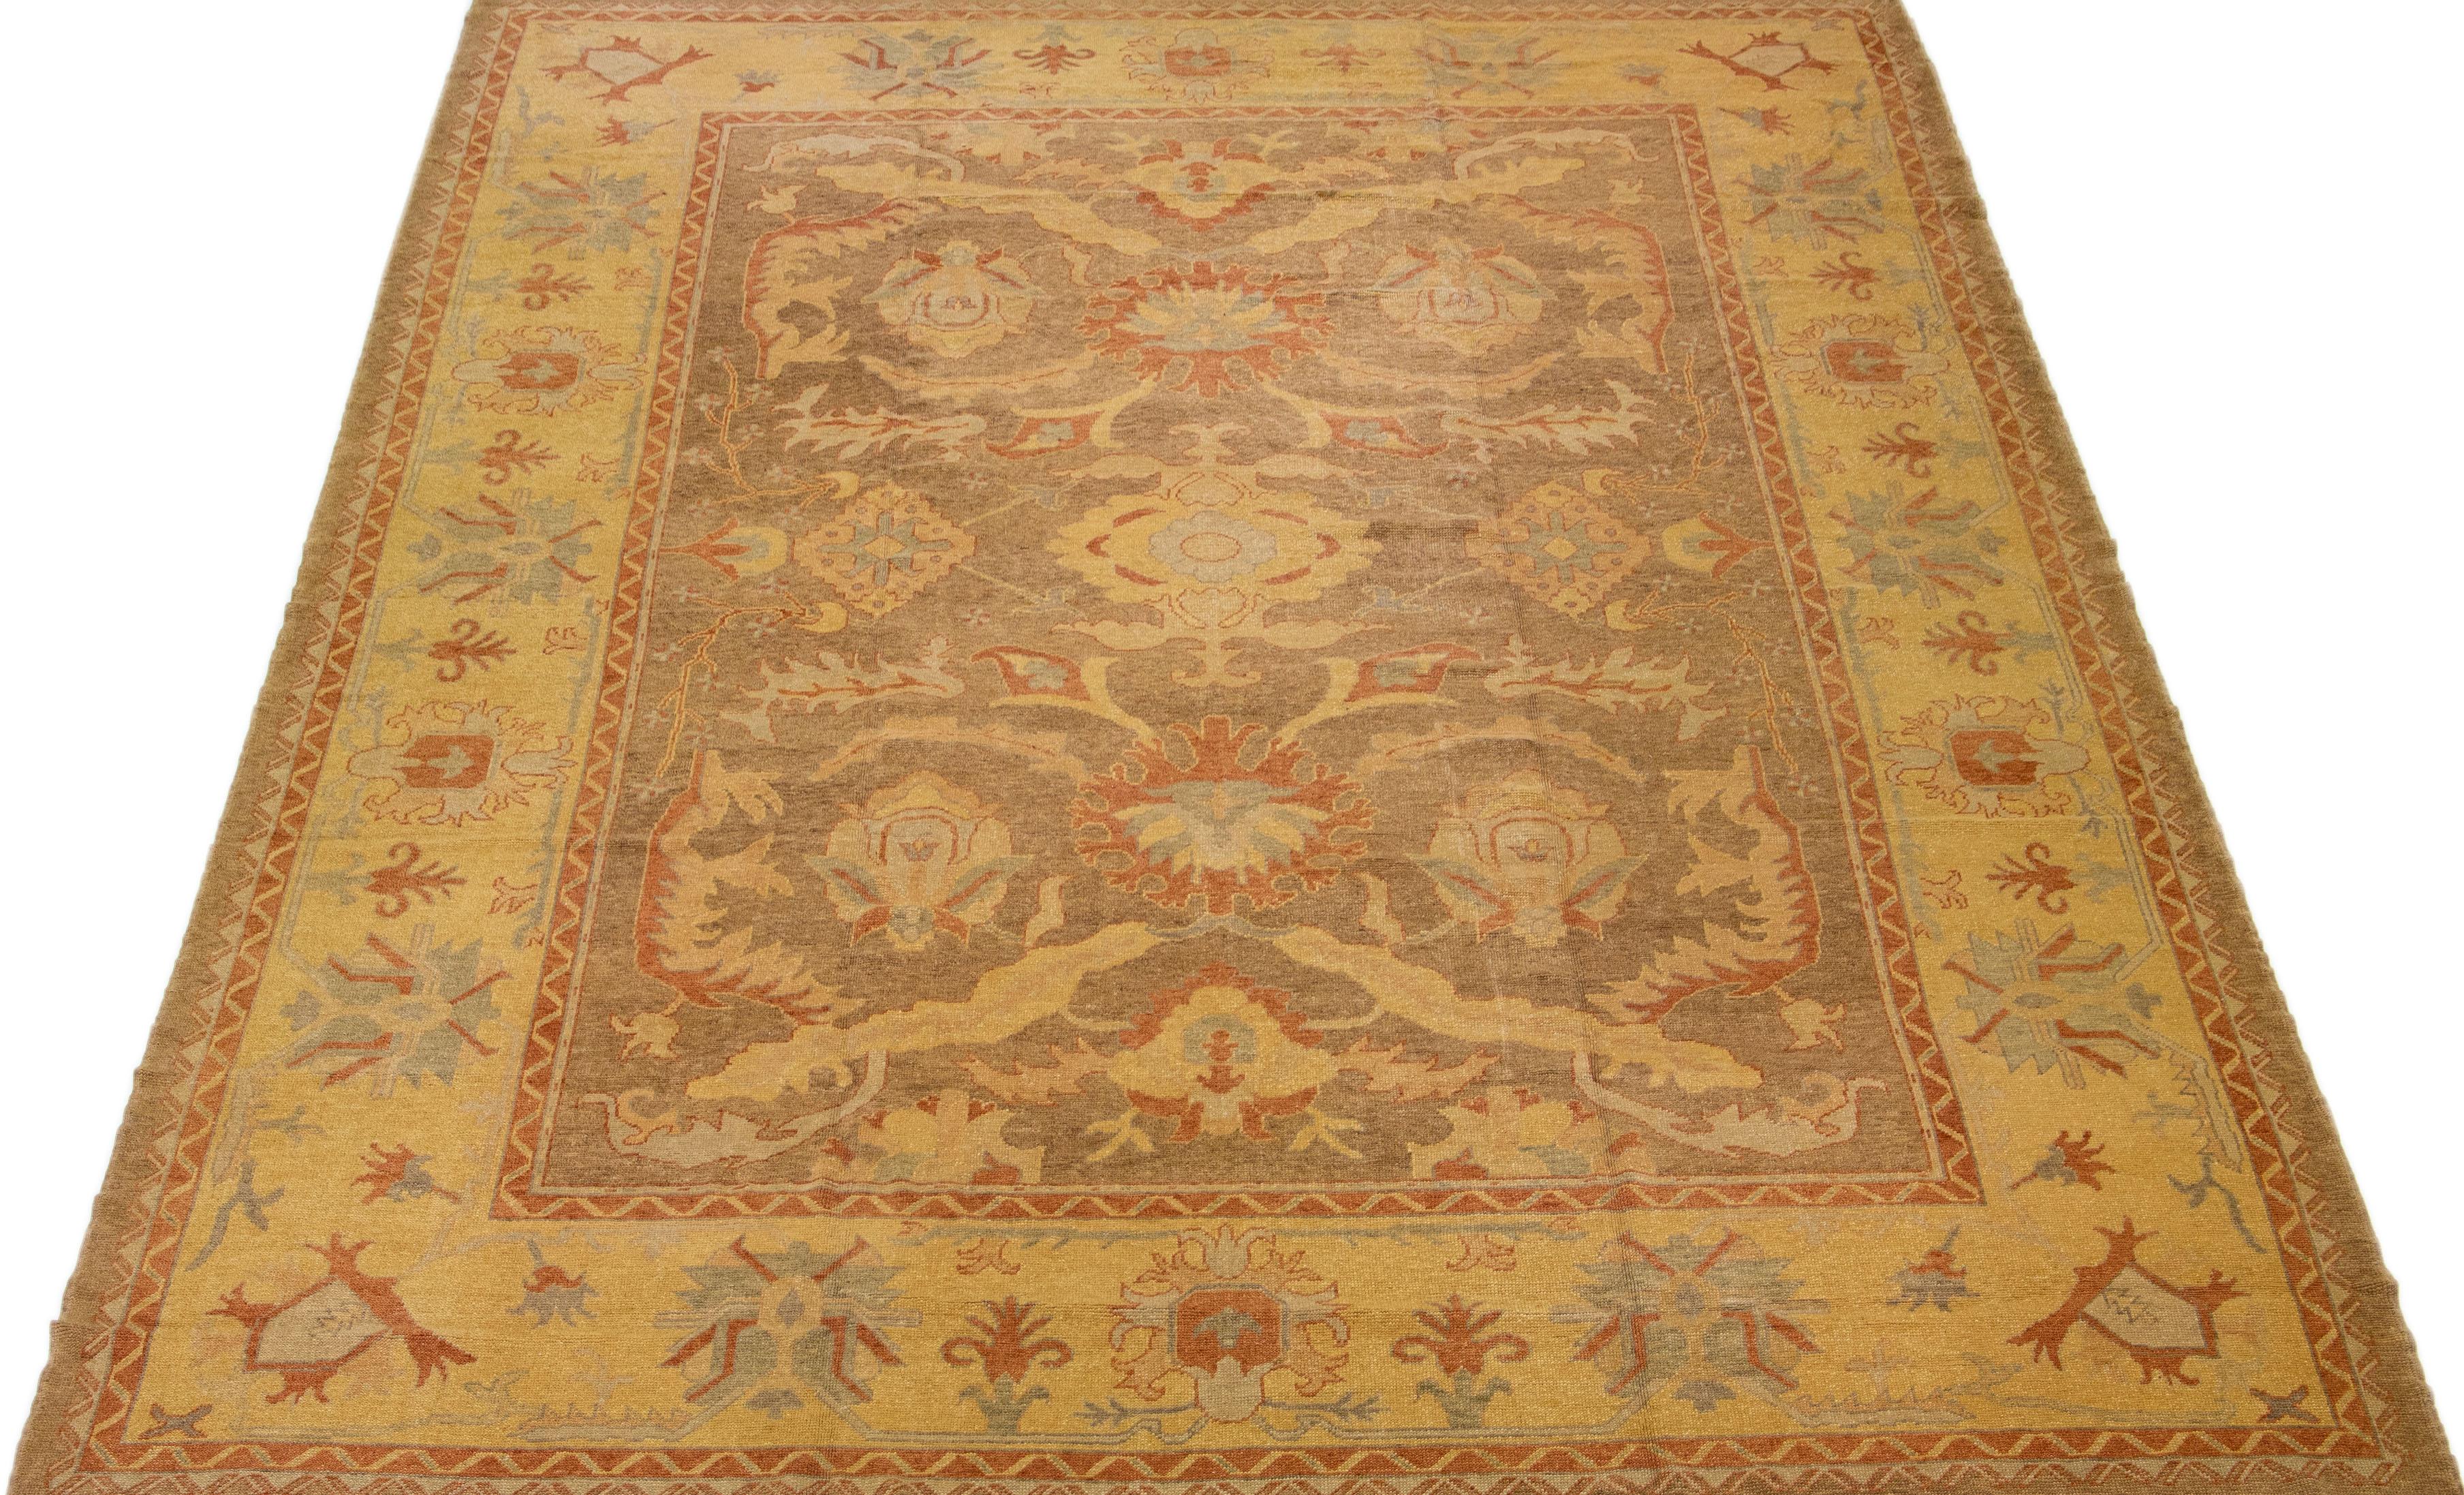 Beautiful modern Turkish Oushak hand-knotted wool rug with a light brown color field. This rug has blue, yellow, and rust accents in a gorgeous large-scale floral motif.

This rug measures: 13'5